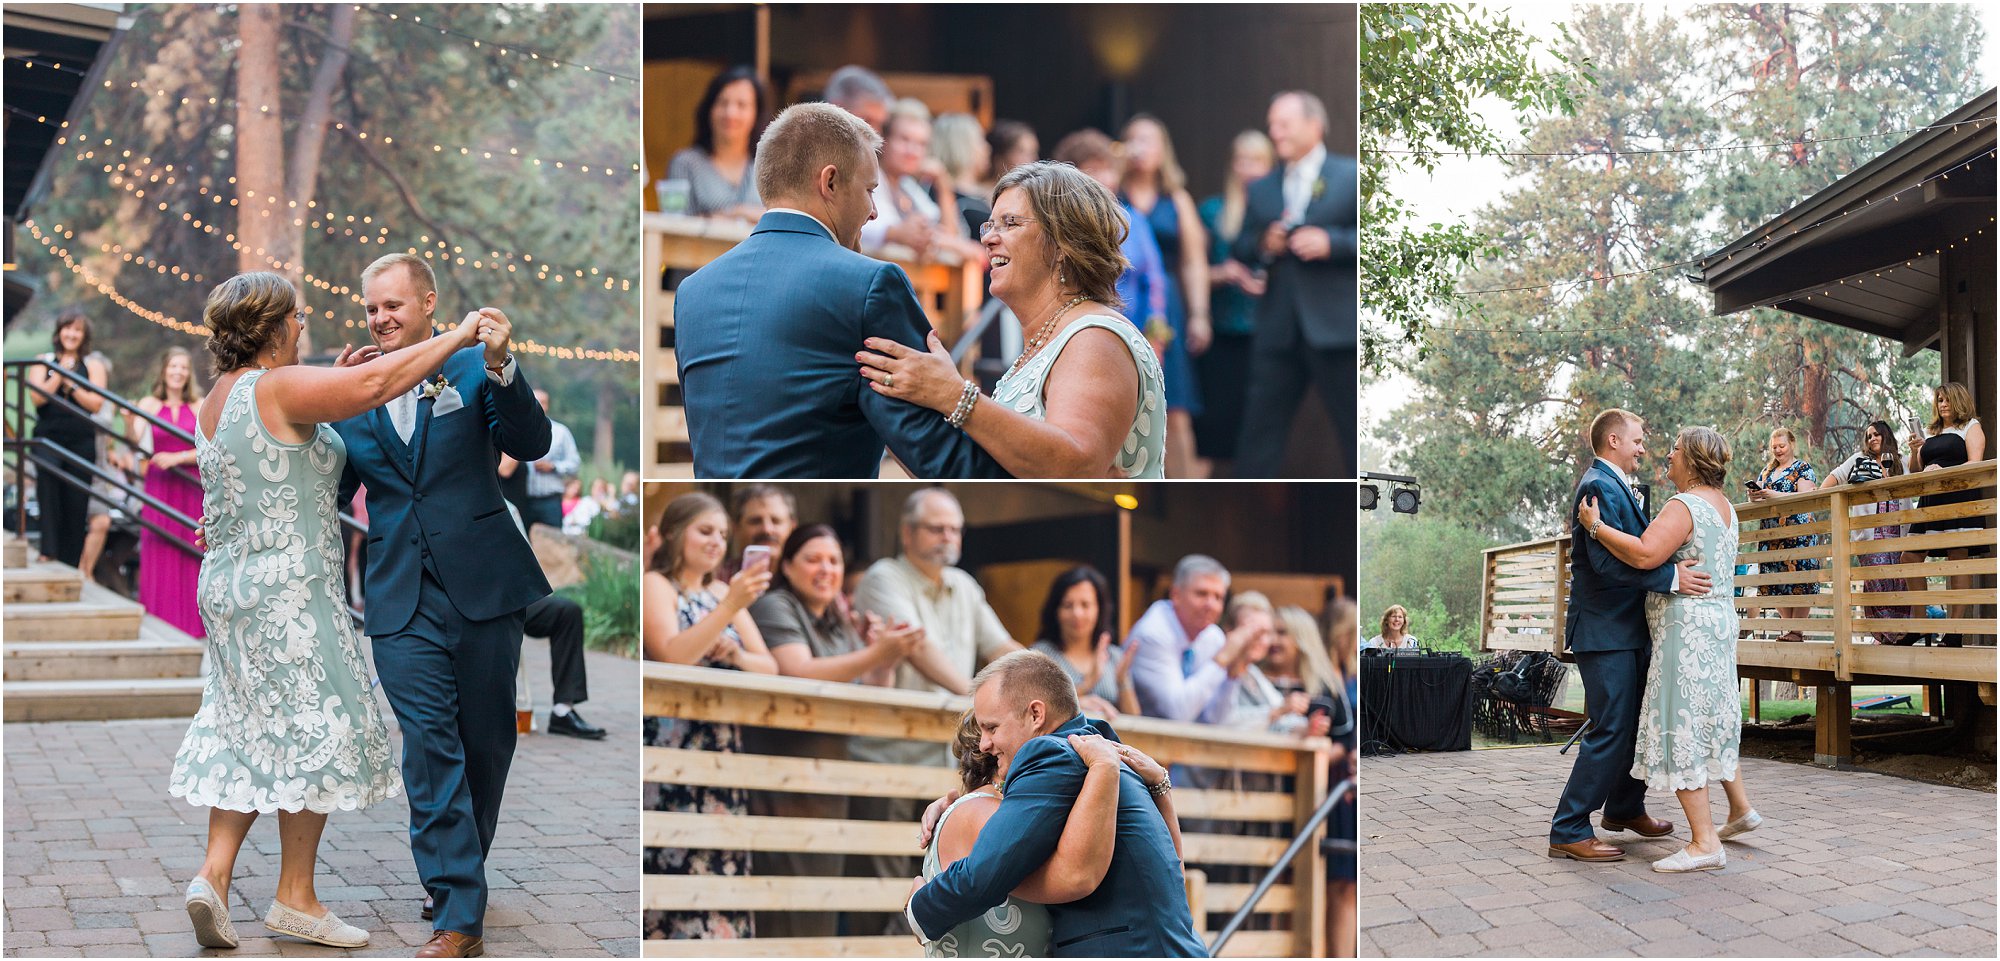 A mother dances with her son on his wedding day at the rustic Rock Springs Ranch in Bend, OR. | Erica Swantek Photography